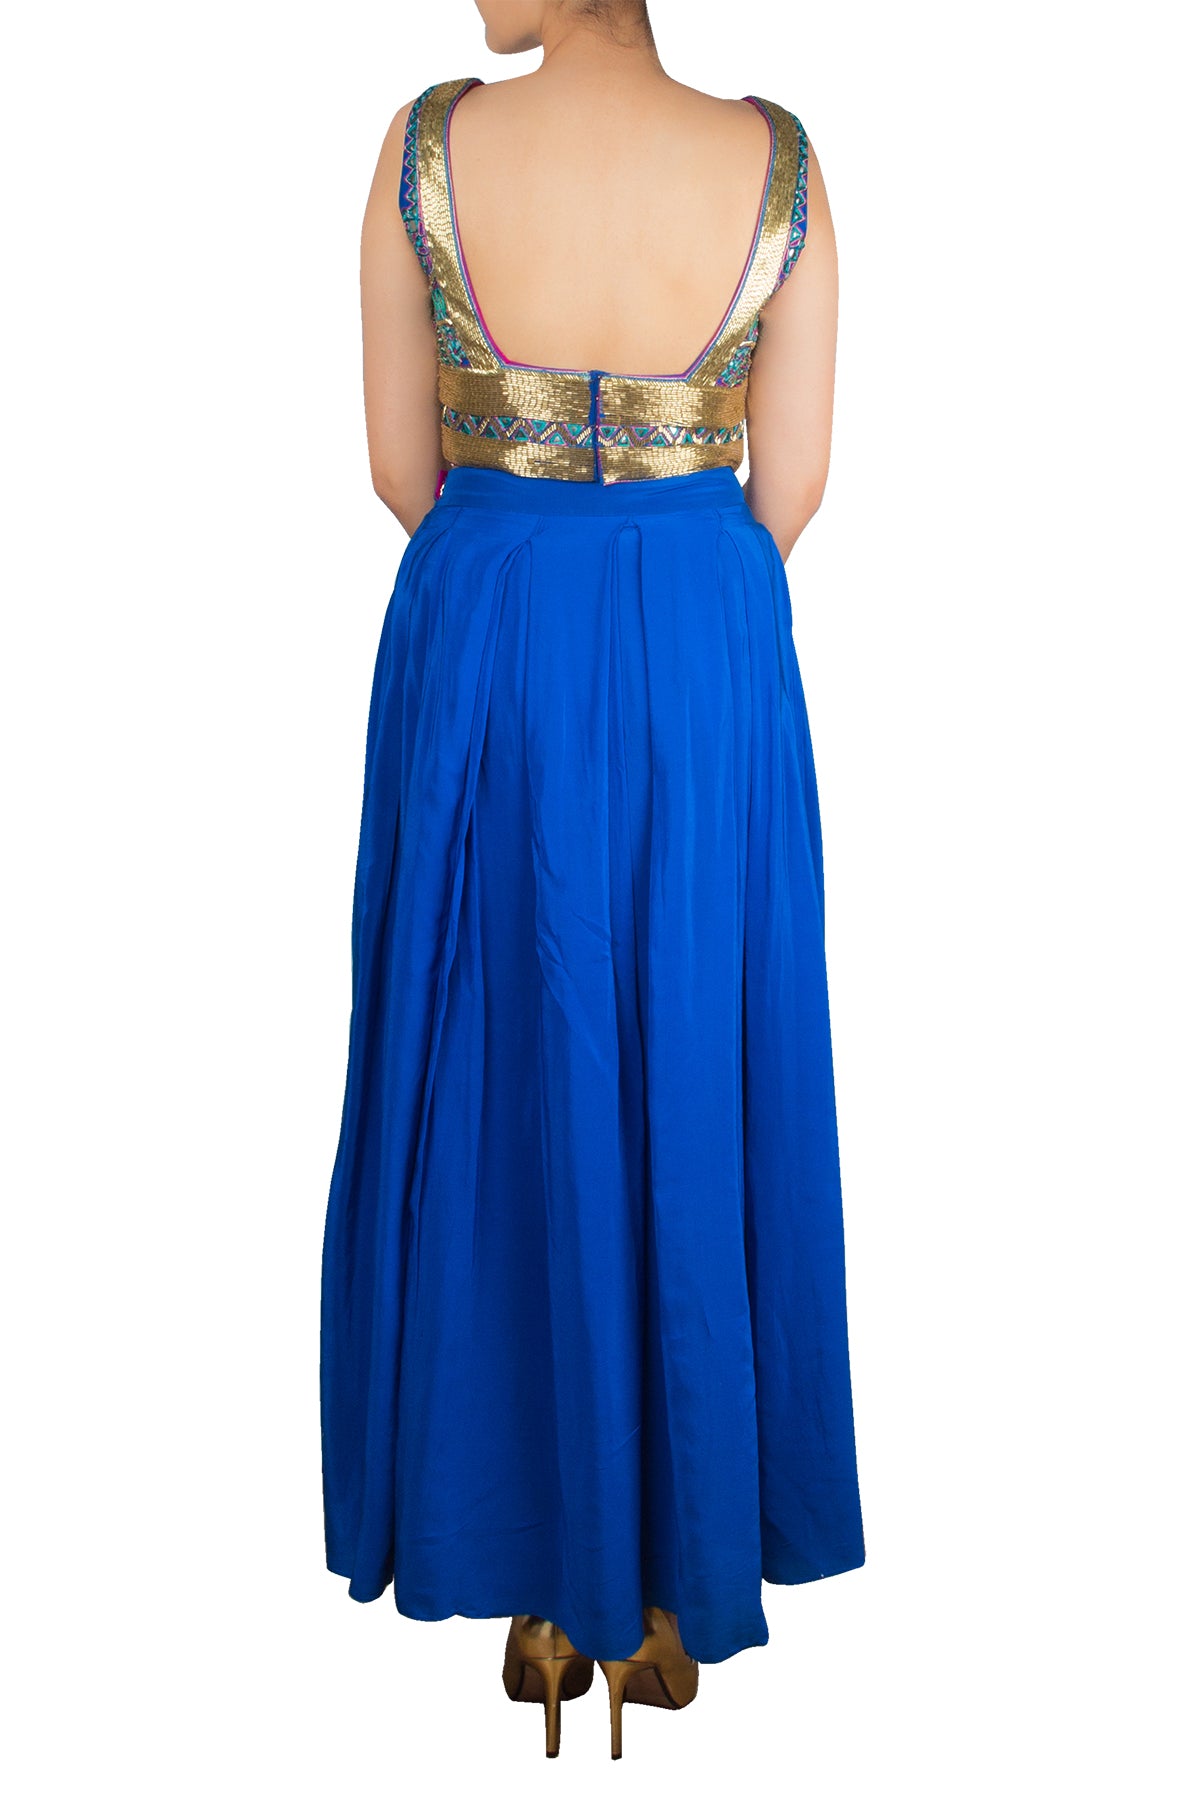 Peacock Mirror Crop Top and Blue Skirt